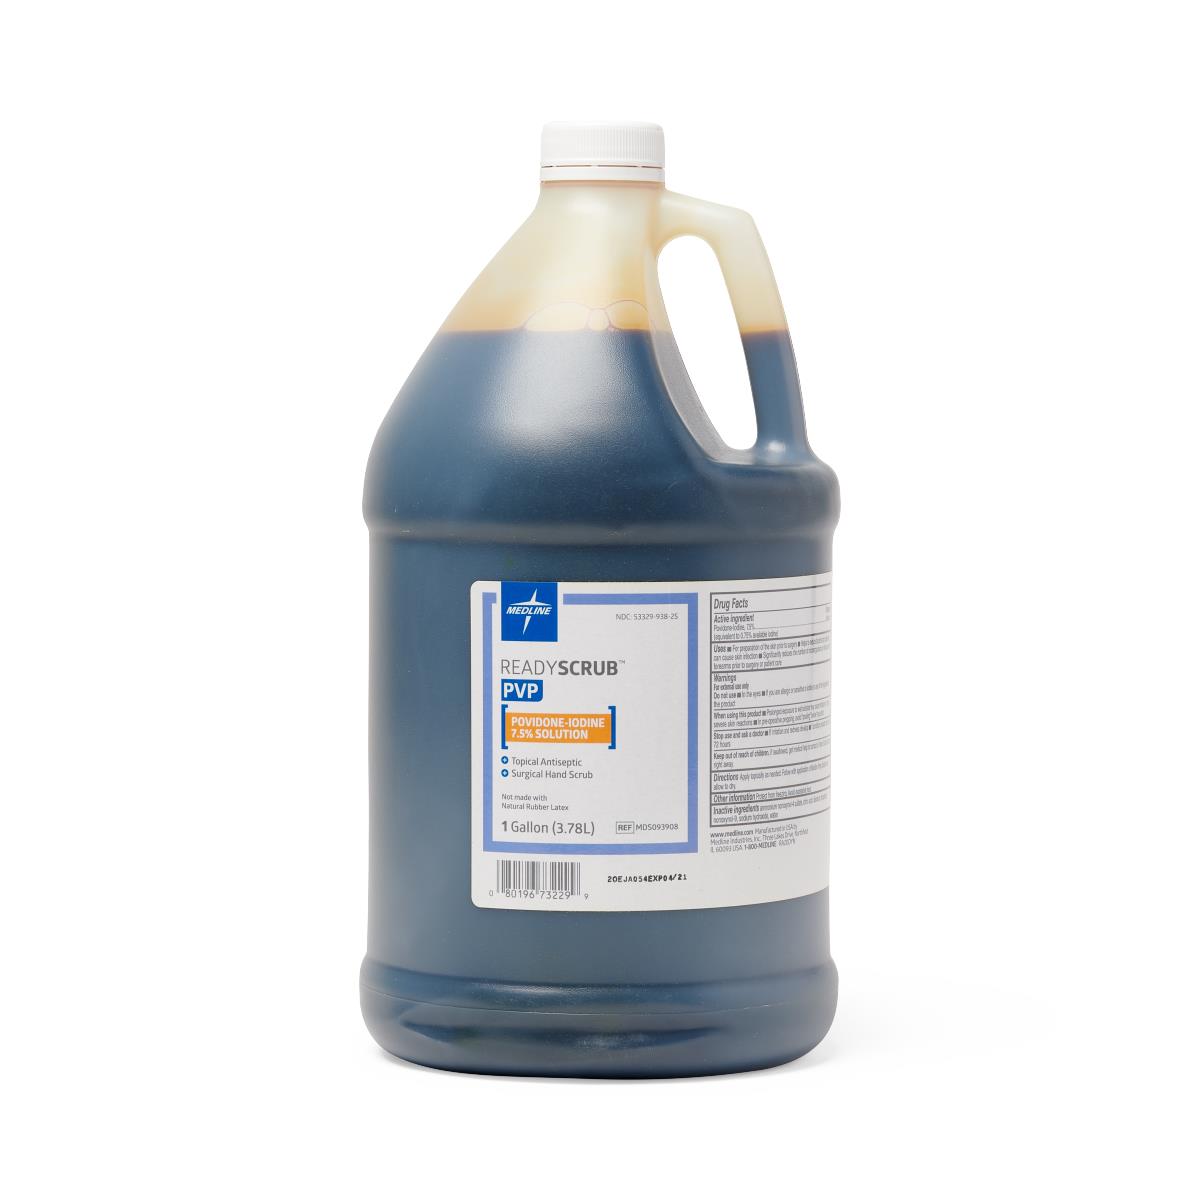 4 Gallon-Case / PVP-I / Screw Top Bottle OR & Surgery Supplies - MEDLINE - Wasatch Medical Supply